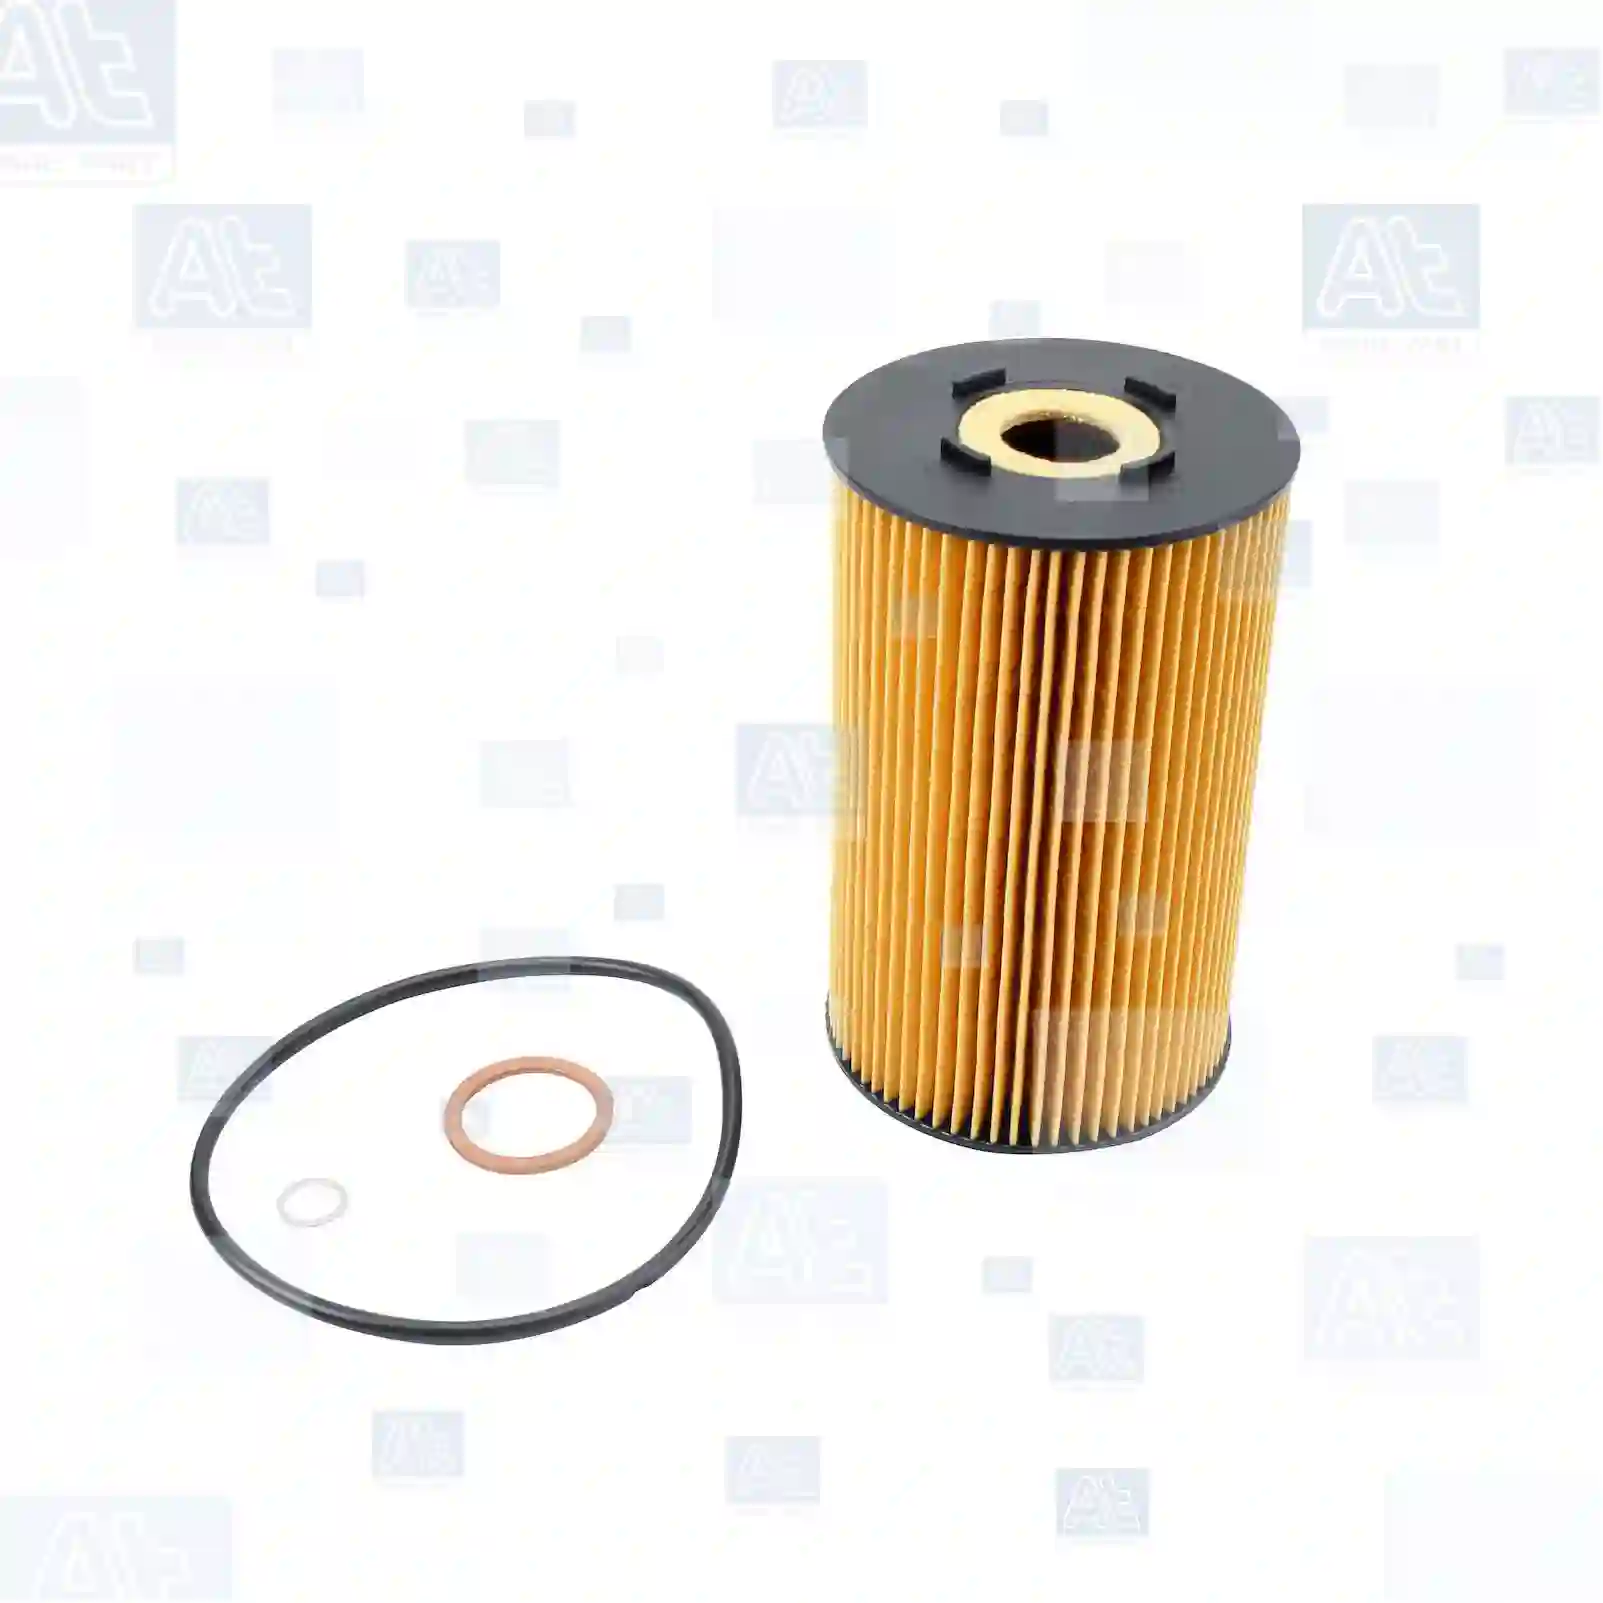 Oil filter insert, 77700594, 009889003, 9839003, 0001336380, 1500977, 211340, 236481, 13113674, 64991200, 12153208, 30301, 60541290003, F139207310510, F139207310511, 5000869, 236481, 25012769, 7984871, 7984871, 0009839003, 9839003, 01229988, 122998800, 24151104, 6750492156, AT260213, 570958308, 7211208, 30301, 0001800909, 0011844125, 0011844425, 0011845125, 0011845425, 0011845455, 3141800109, 3641800009, 3641800109, 364180010967, 3641800110, 3641800309, 3641840225, 3661841225, 605411820405, 6054129003, 605412970003, 905412970003, 0001229988, 0024151104, 0122998800, 5001846627, 6005019805, 6005019823, 6750492156, LU225, 15613-98001, 34318-47425 ||  77700594 At Spare Part | Engine, Accelerator Pedal, Camshaft, Connecting Rod, Crankcase, Crankshaft, Cylinder Head, Engine Suspension Mountings, Exhaust Manifold, Exhaust Gas Recirculation, Filter Kits, Flywheel Housing, General Overhaul Kits, Engine, Intake Manifold, Oil Cleaner, Oil Cooler, Oil Filter, Oil Pump, Oil Sump, Piston & Liner, Sensor & Switch, Timing Case, Turbocharger, Cooling System, Belt Tensioner, Coolant Filter, Coolant Pipe, Corrosion Prevention Agent, Drive, Expansion Tank, Fan, Intercooler, Monitors & Gauges, Radiator, Thermostat, V-Belt / Timing belt, Water Pump, Fuel System, Electronical Injector Unit, Feed Pump, Fuel Filter, cpl., Fuel Gauge Sender,  Fuel Line, Fuel Pump, Fuel Tank, Injection Line Kit, Injection Pump, Exhaust System, Clutch & Pedal, Gearbox, Propeller Shaft, Axles, Brake System, Hubs & Wheels, Suspension, Leaf Spring, Universal Parts / Accessories, Steering, Electrical System, Cabin Oil filter insert, 77700594, 009889003, 9839003, 0001336380, 1500977, 211340, 236481, 13113674, 64991200, 12153208, 30301, 60541290003, F139207310510, F139207310511, 5000869, 236481, 25012769, 7984871, 7984871, 0009839003, 9839003, 01229988, 122998800, 24151104, 6750492156, AT260213, 570958308, 7211208, 30301, 0001800909, 0011844125, 0011844425, 0011845125, 0011845425, 0011845455, 3141800109, 3641800009, 3641800109, 364180010967, 3641800110, 3641800309, 3641840225, 3661841225, 605411820405, 6054129003, 605412970003, 905412970003, 0001229988, 0024151104, 0122998800, 5001846627, 6005019805, 6005019823, 6750492156, LU225, 15613-98001, 34318-47425 ||  77700594 At Spare Part | Engine, Accelerator Pedal, Camshaft, Connecting Rod, Crankcase, Crankshaft, Cylinder Head, Engine Suspension Mountings, Exhaust Manifold, Exhaust Gas Recirculation, Filter Kits, Flywheel Housing, General Overhaul Kits, Engine, Intake Manifold, Oil Cleaner, Oil Cooler, Oil Filter, Oil Pump, Oil Sump, Piston & Liner, Sensor & Switch, Timing Case, Turbocharger, Cooling System, Belt Tensioner, Coolant Filter, Coolant Pipe, Corrosion Prevention Agent, Drive, Expansion Tank, Fan, Intercooler, Monitors & Gauges, Radiator, Thermostat, V-Belt / Timing belt, Water Pump, Fuel System, Electronical Injector Unit, Feed Pump, Fuel Filter, cpl., Fuel Gauge Sender,  Fuel Line, Fuel Pump, Fuel Tank, Injection Line Kit, Injection Pump, Exhaust System, Clutch & Pedal, Gearbox, Propeller Shaft, Axles, Brake System, Hubs & Wheels, Suspension, Leaf Spring, Universal Parts / Accessories, Steering, Electrical System, Cabin